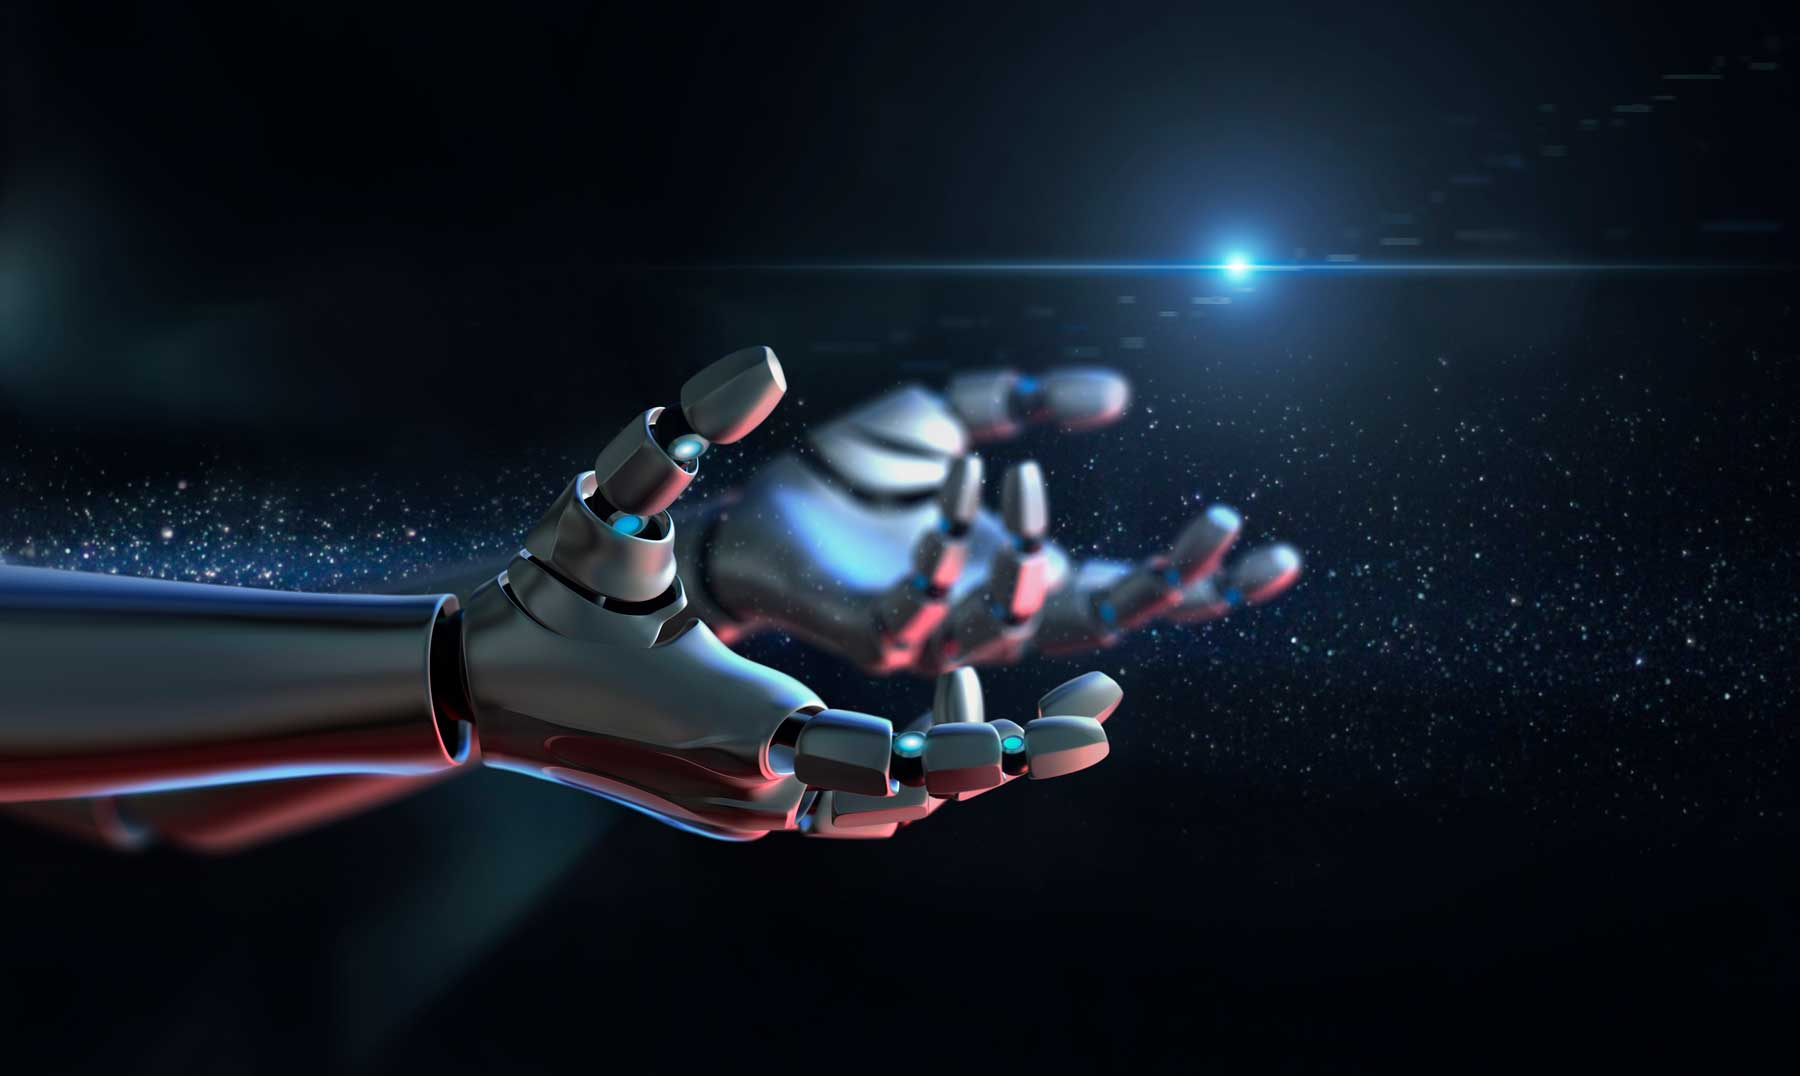 Robotic arms reaching out